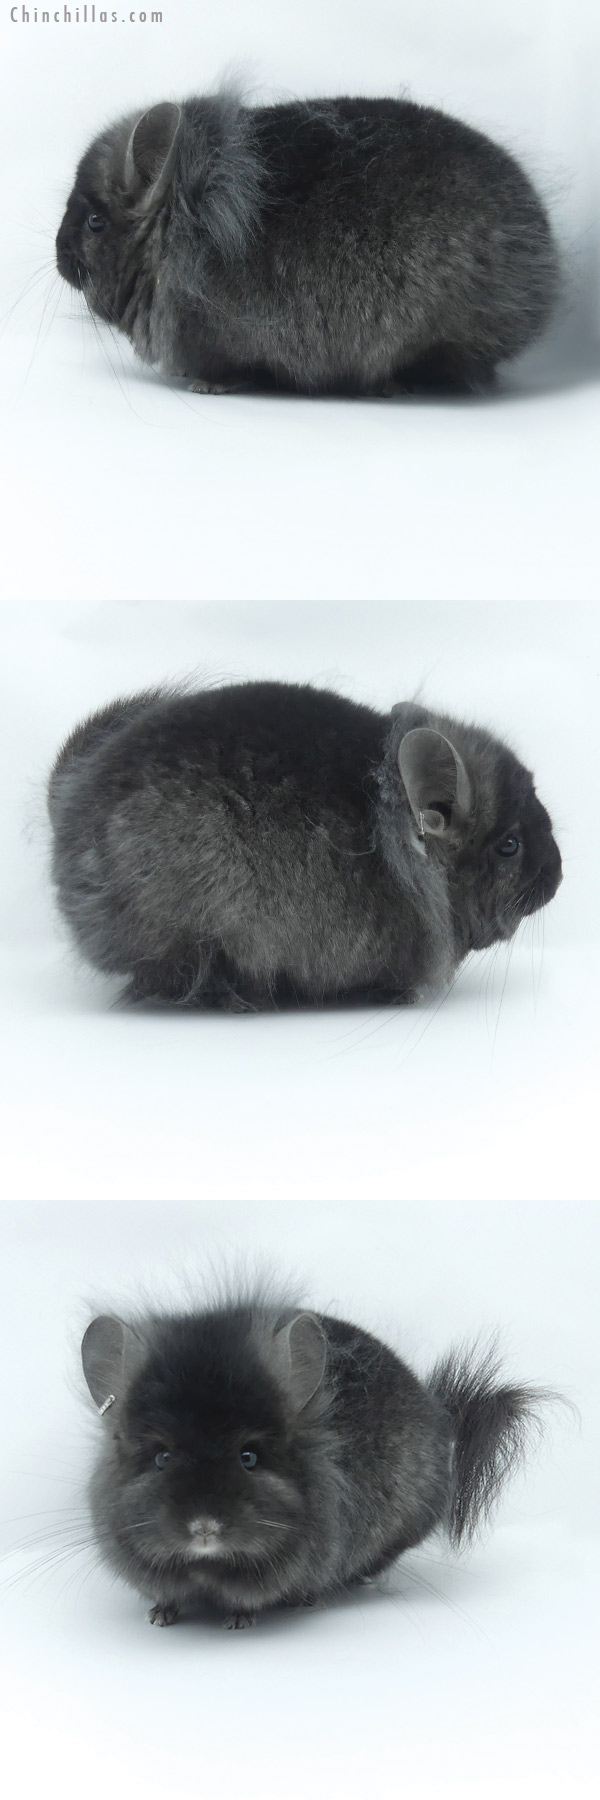 Chinchilla or related item offered for sale or export on Chinchillas.com - 20028 Exceptional Ebony G2  Royal Persian Angora Male Chinchilla